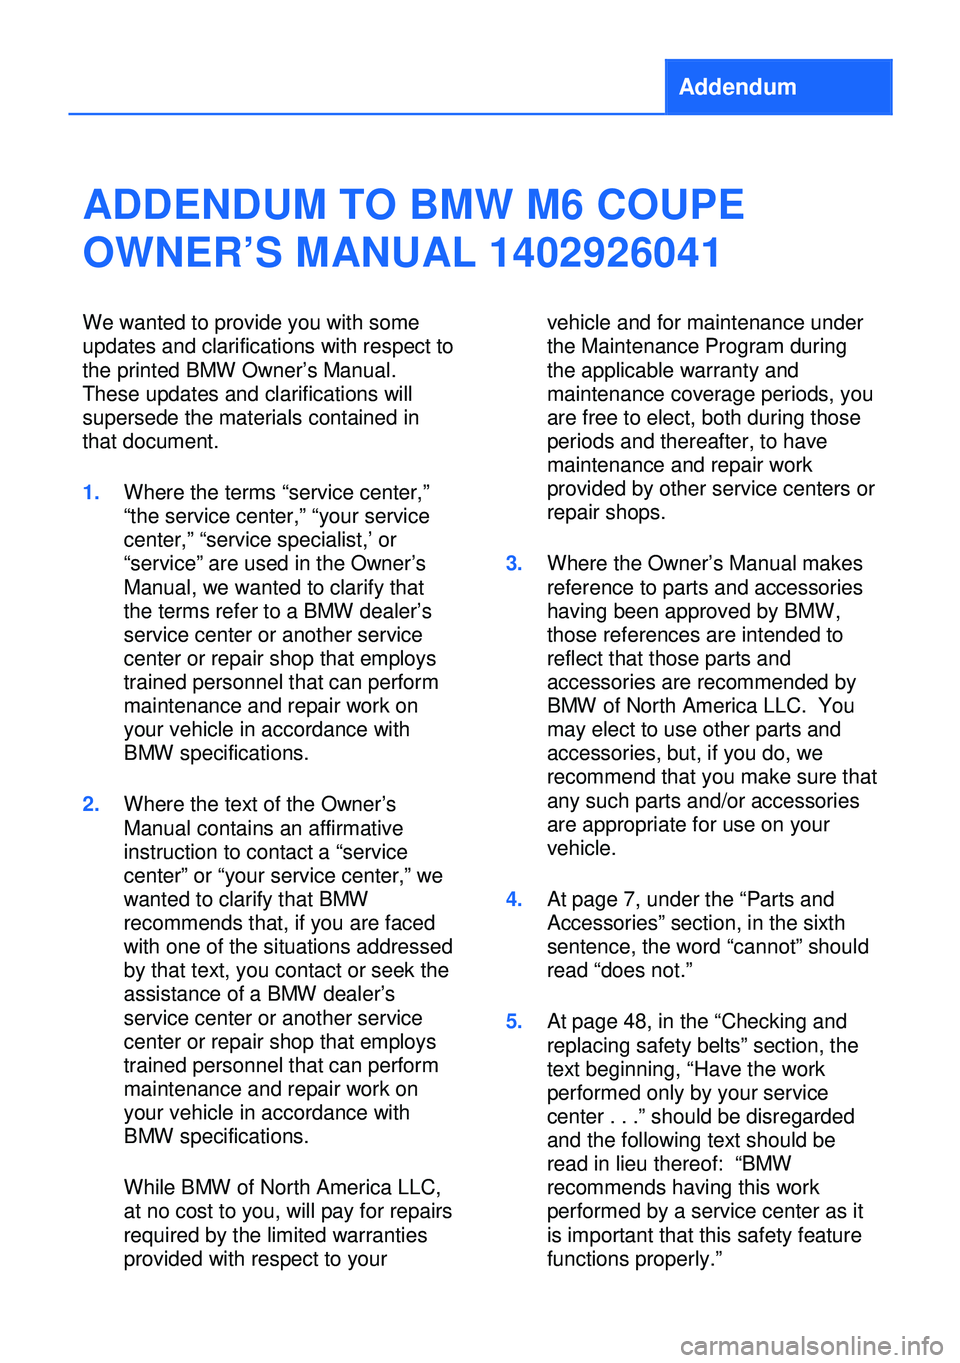 BMW M6 COUPE 2013 F13 Owners Manual Addendum
ADDENDUM TO BMW M6 COUPE
OWNER’S MANUAL 1402926041
We wanted to provide you with some
updates and clarifications with respect to
the printed BMW Owner’s Manual.
These updates and clarific